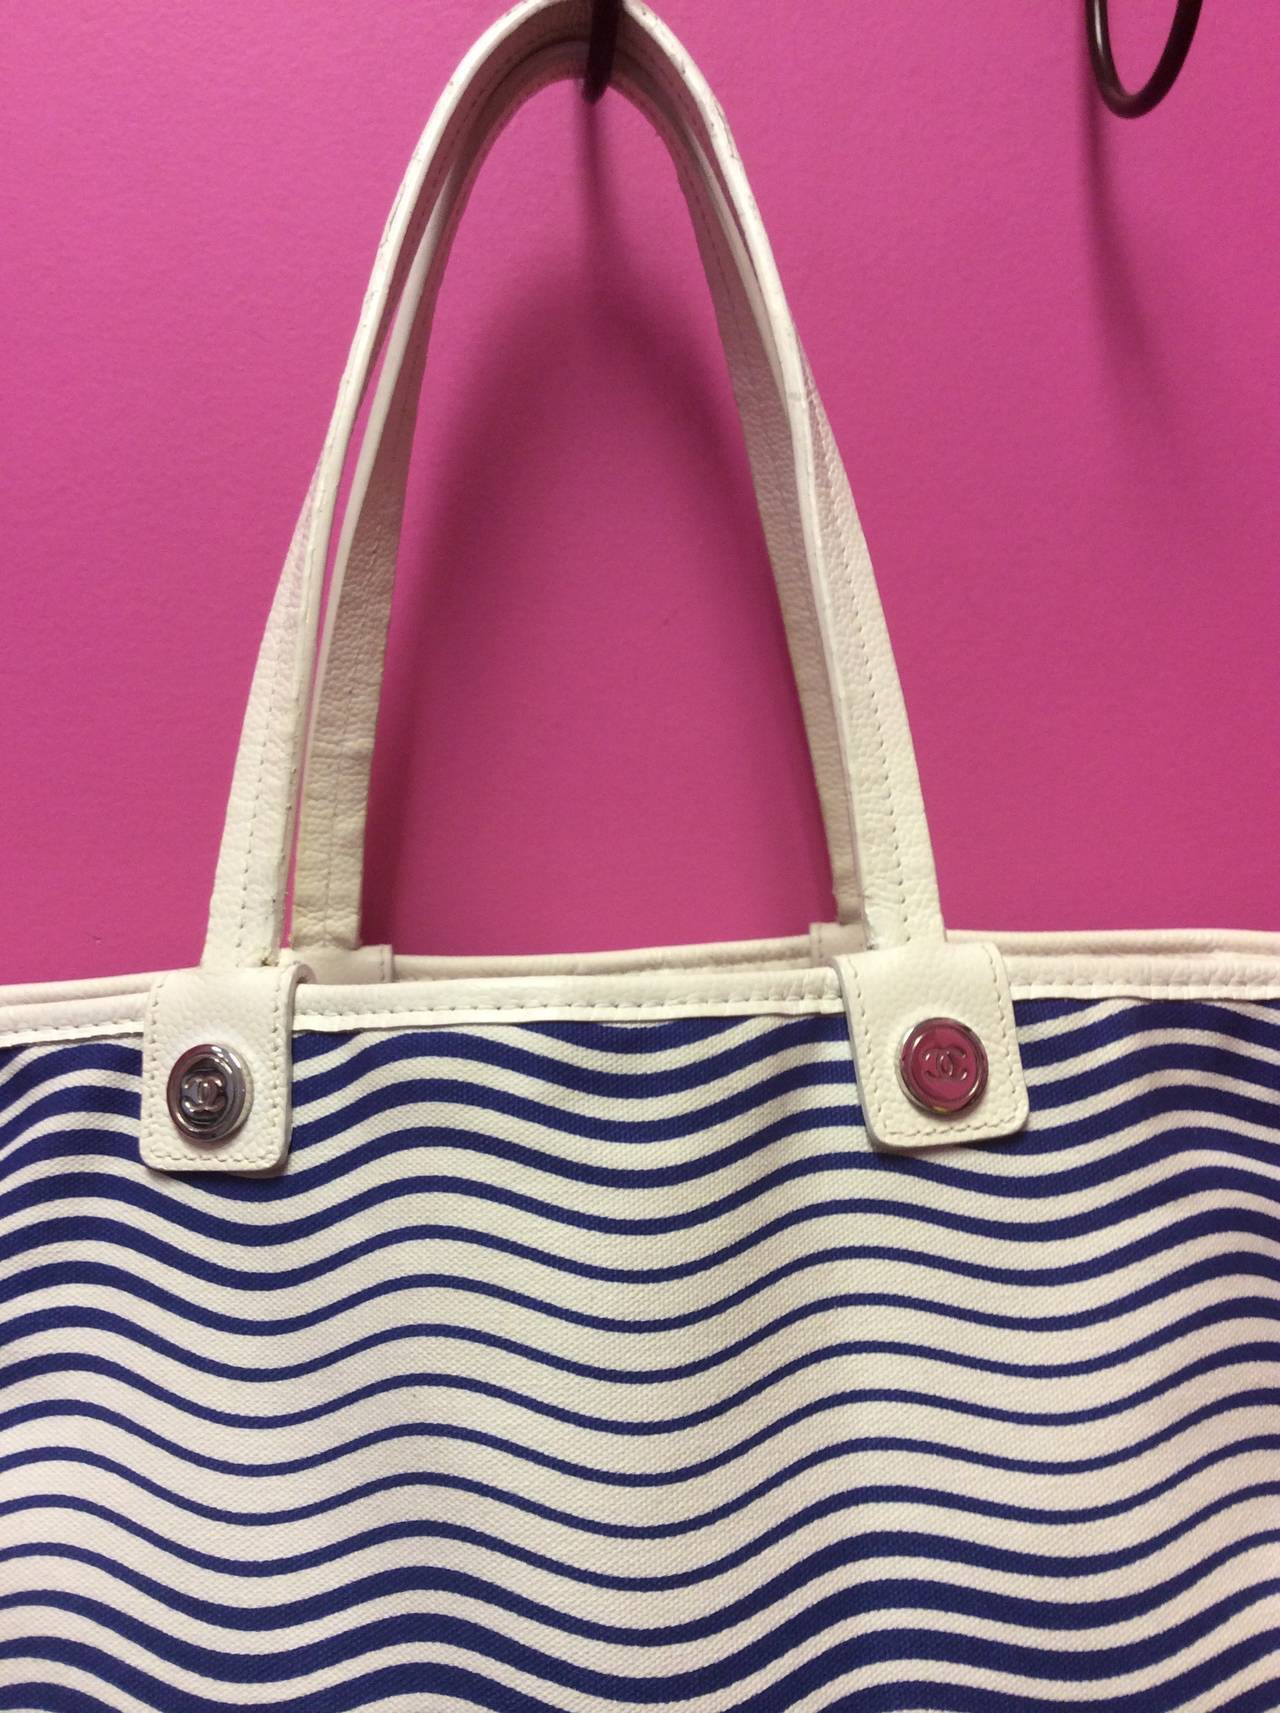 This is a fun Chanel Cruise collection large canvas tote. White leather handles. Navy blue and white canvas.
Measurements:
16